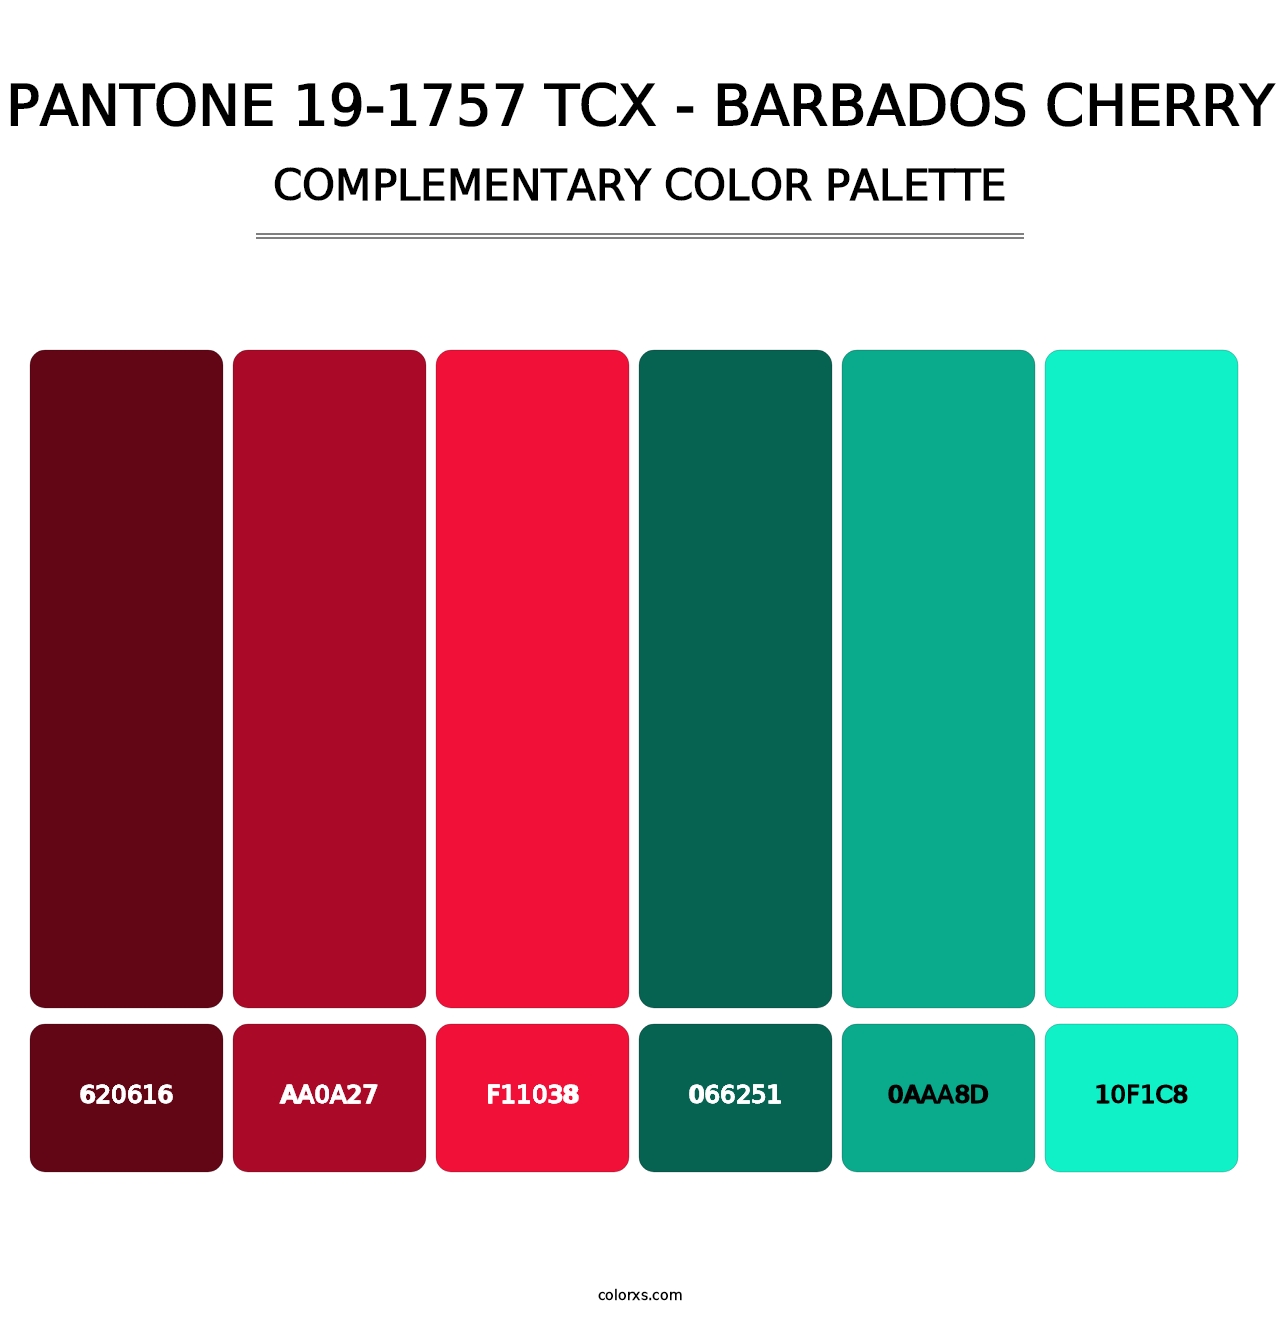 PANTONE 19-1757 TCX - Barbados Cherry - Complementary Color Palette